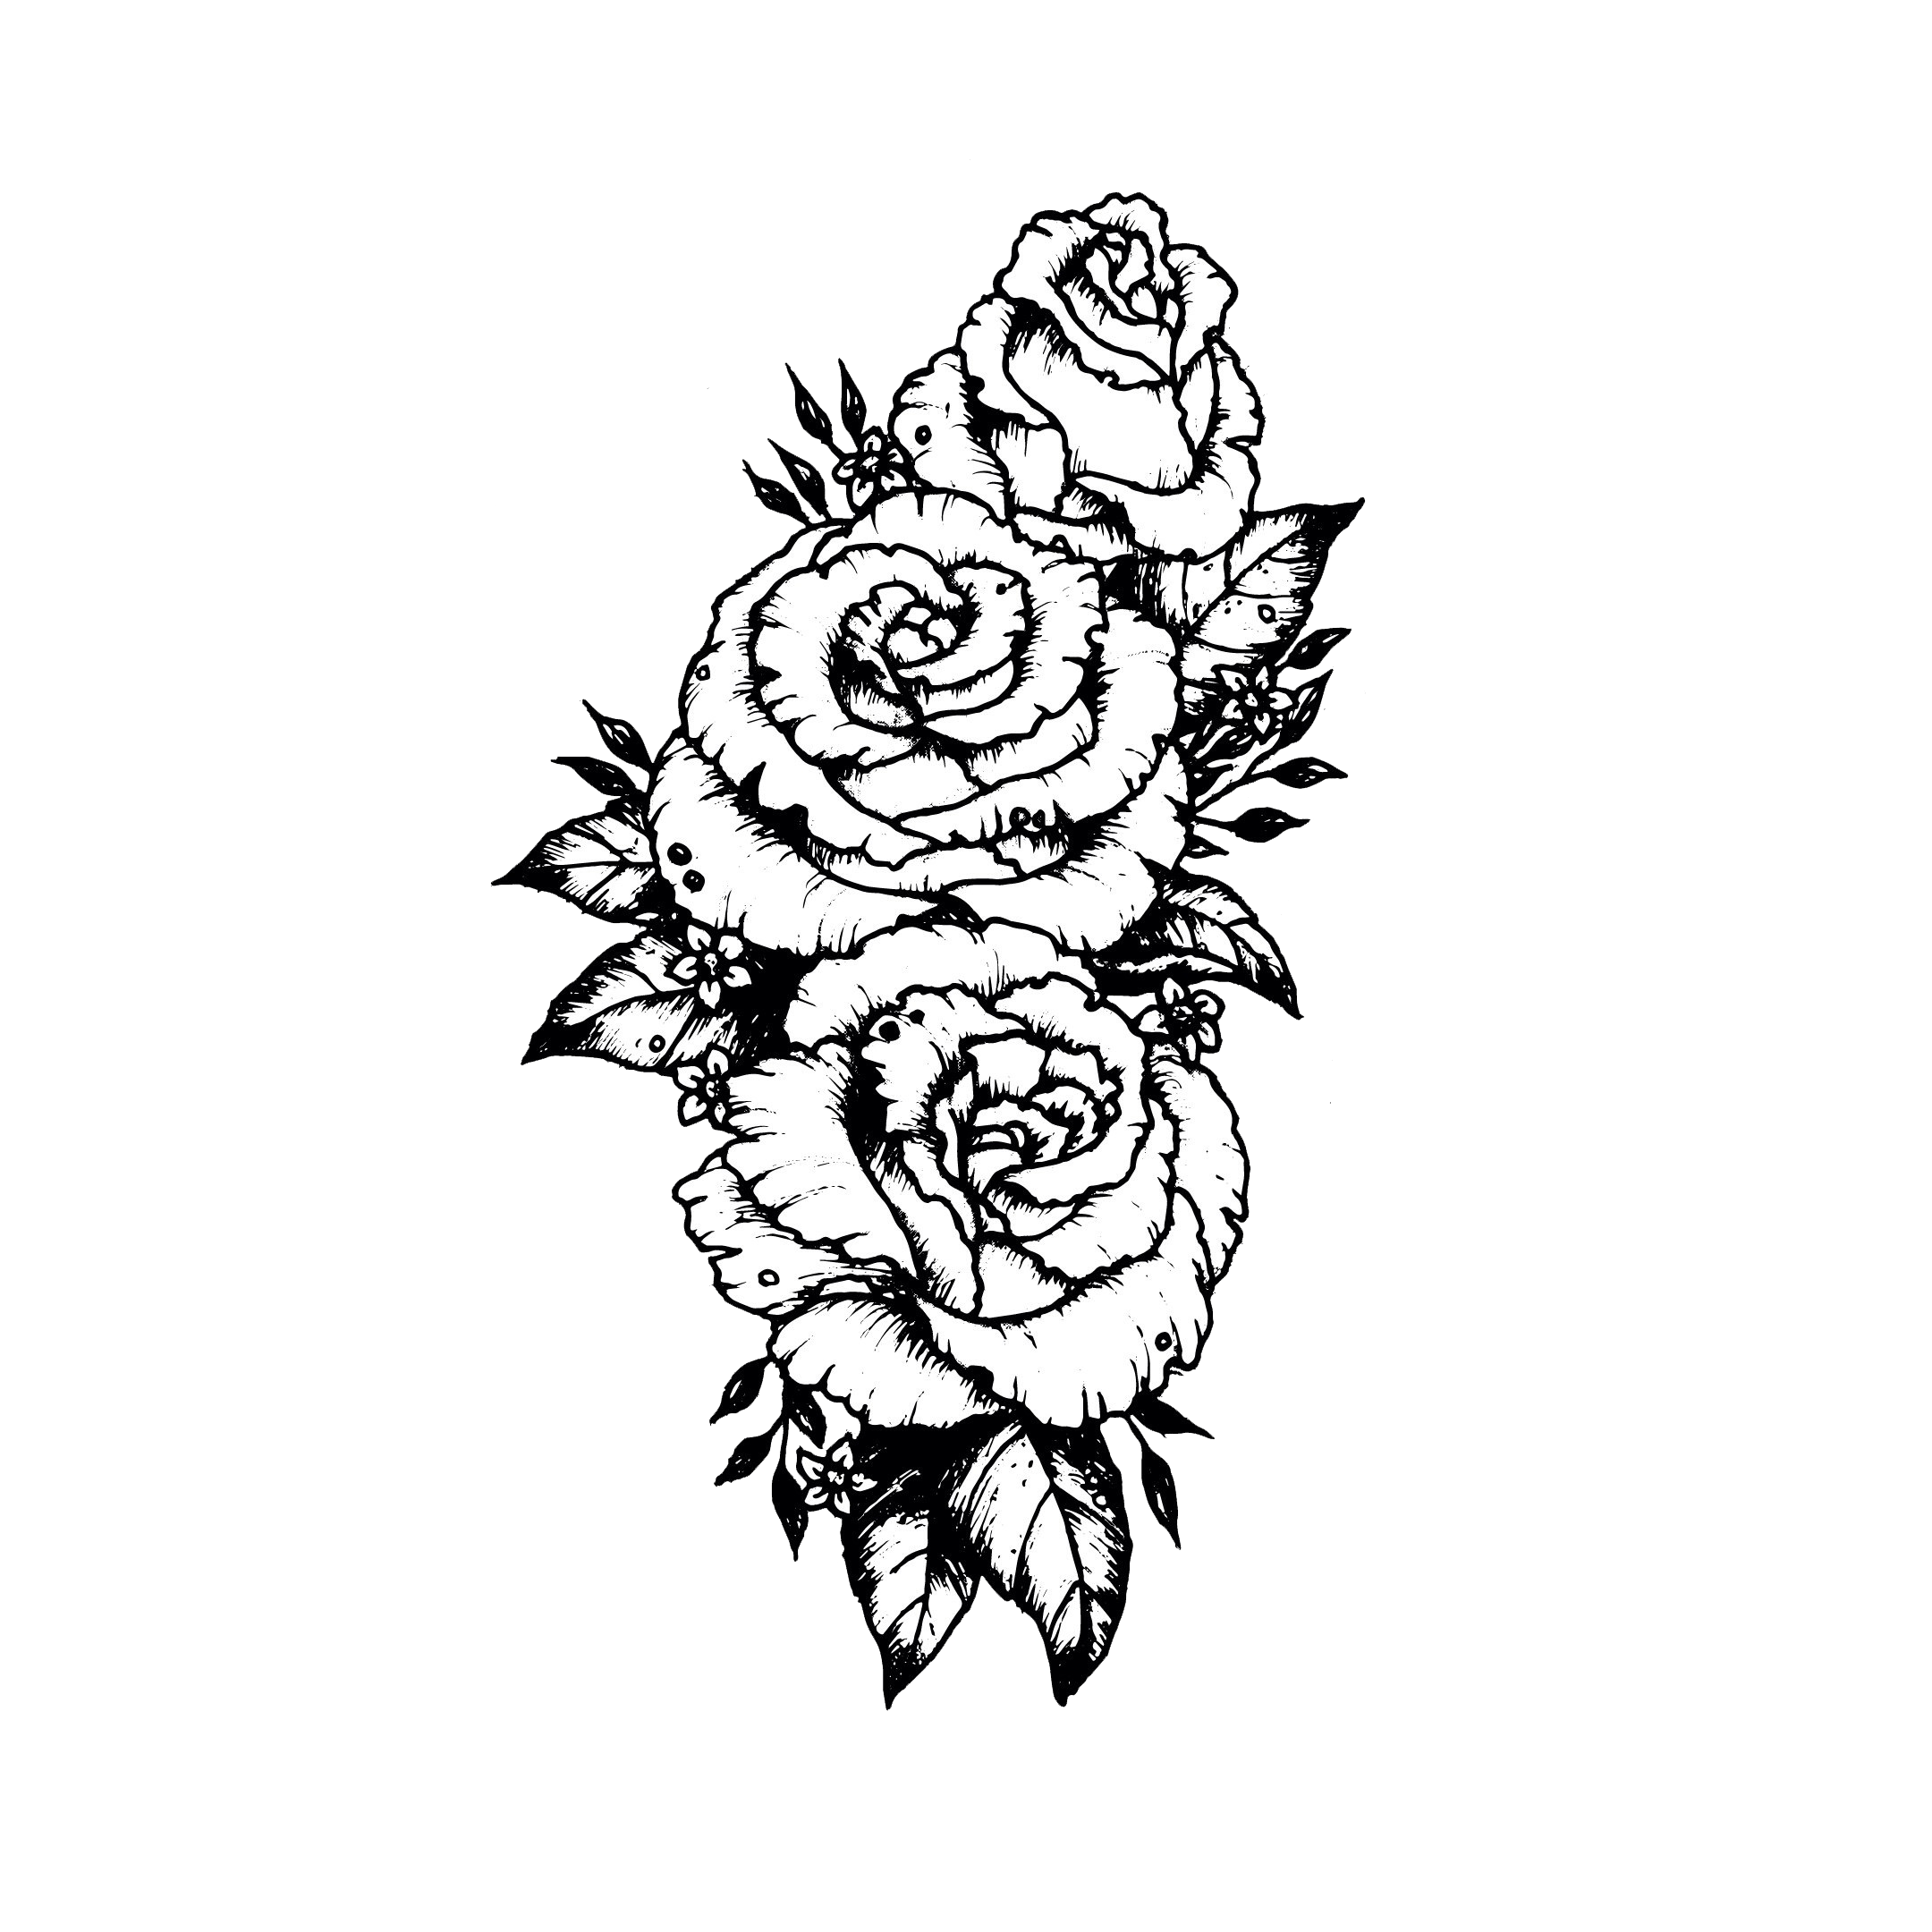 Sleeve tattoo Drawing Sketch Rose - rose png download ...